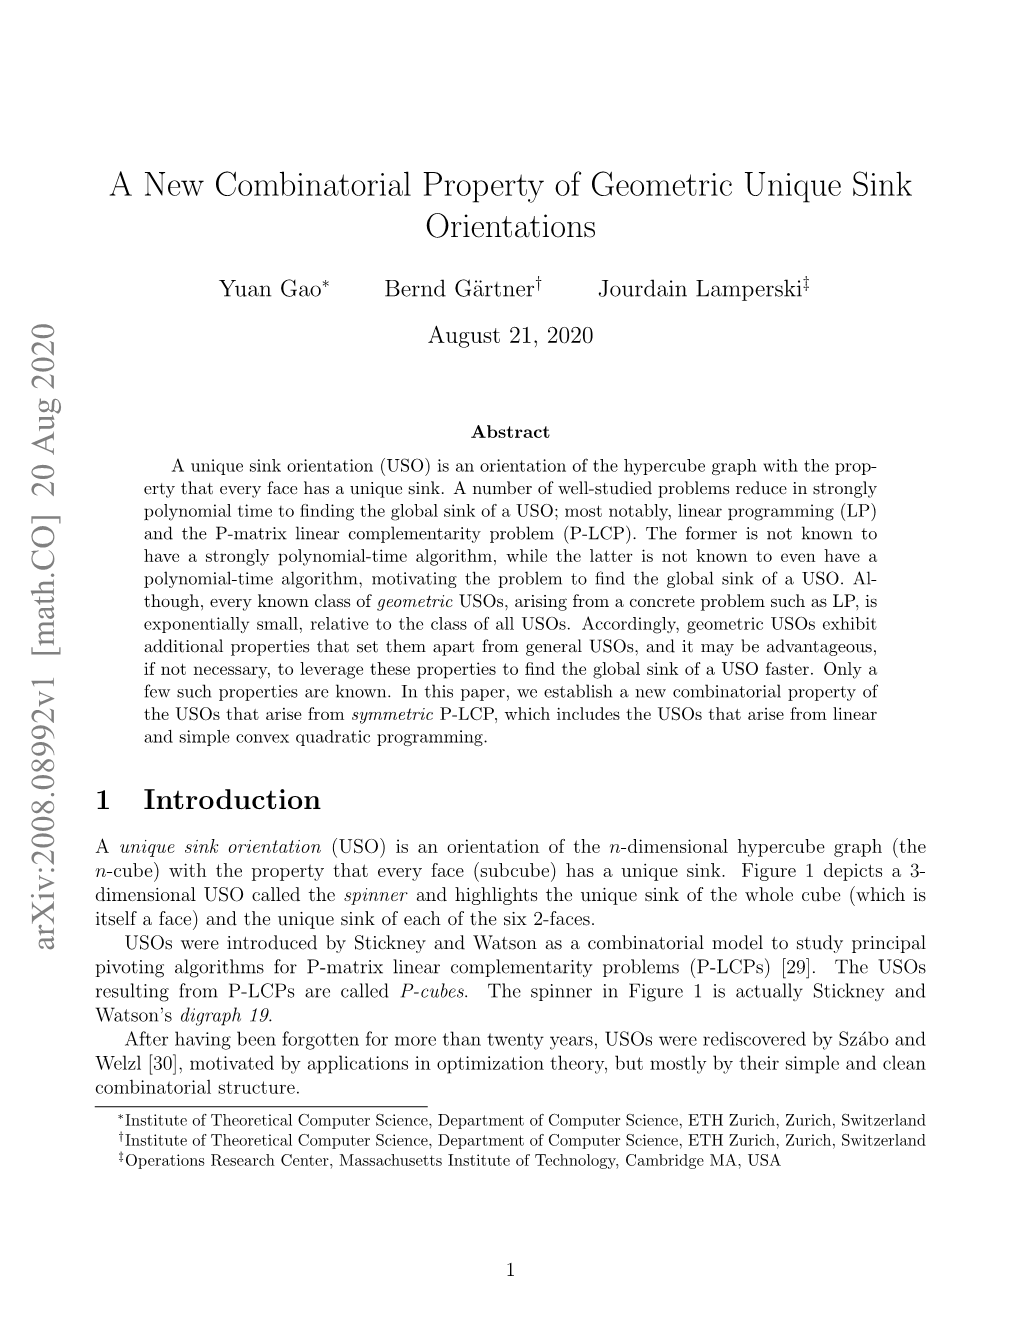 A New Combinatorial Property of Geometric Unique Sink Orientations